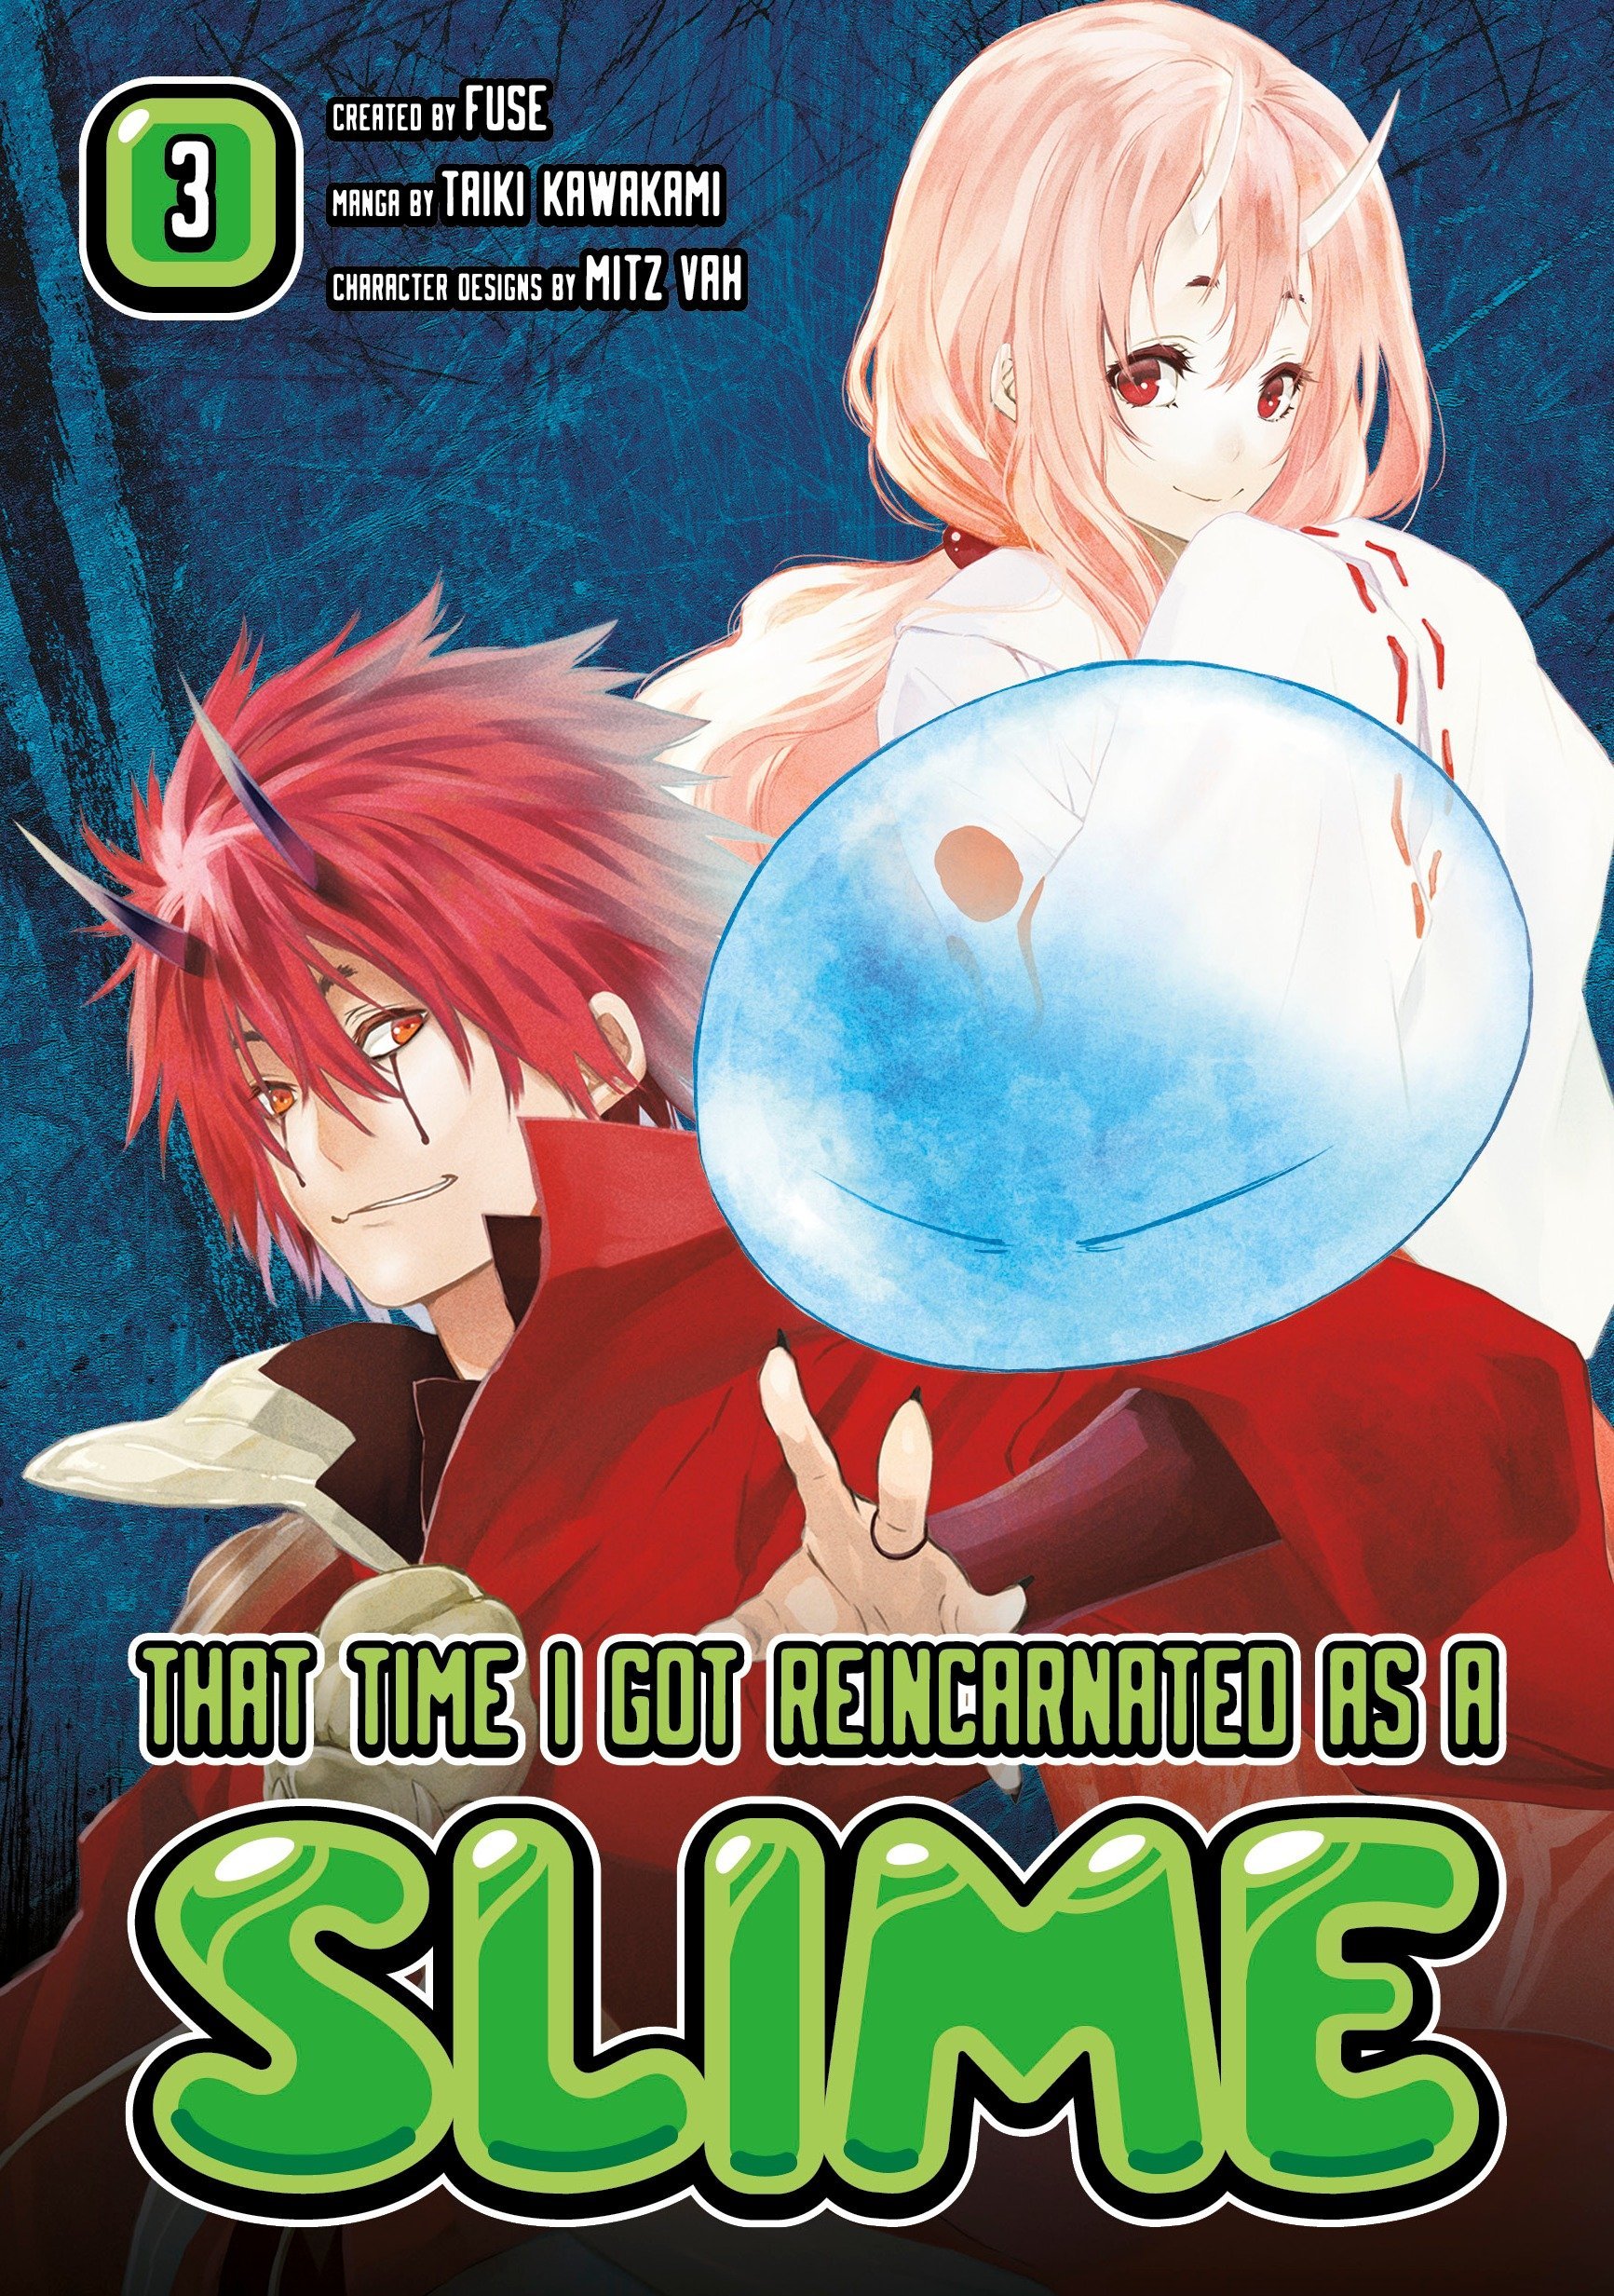 That Time I Got Reincarnated as a Slime - Volume 3